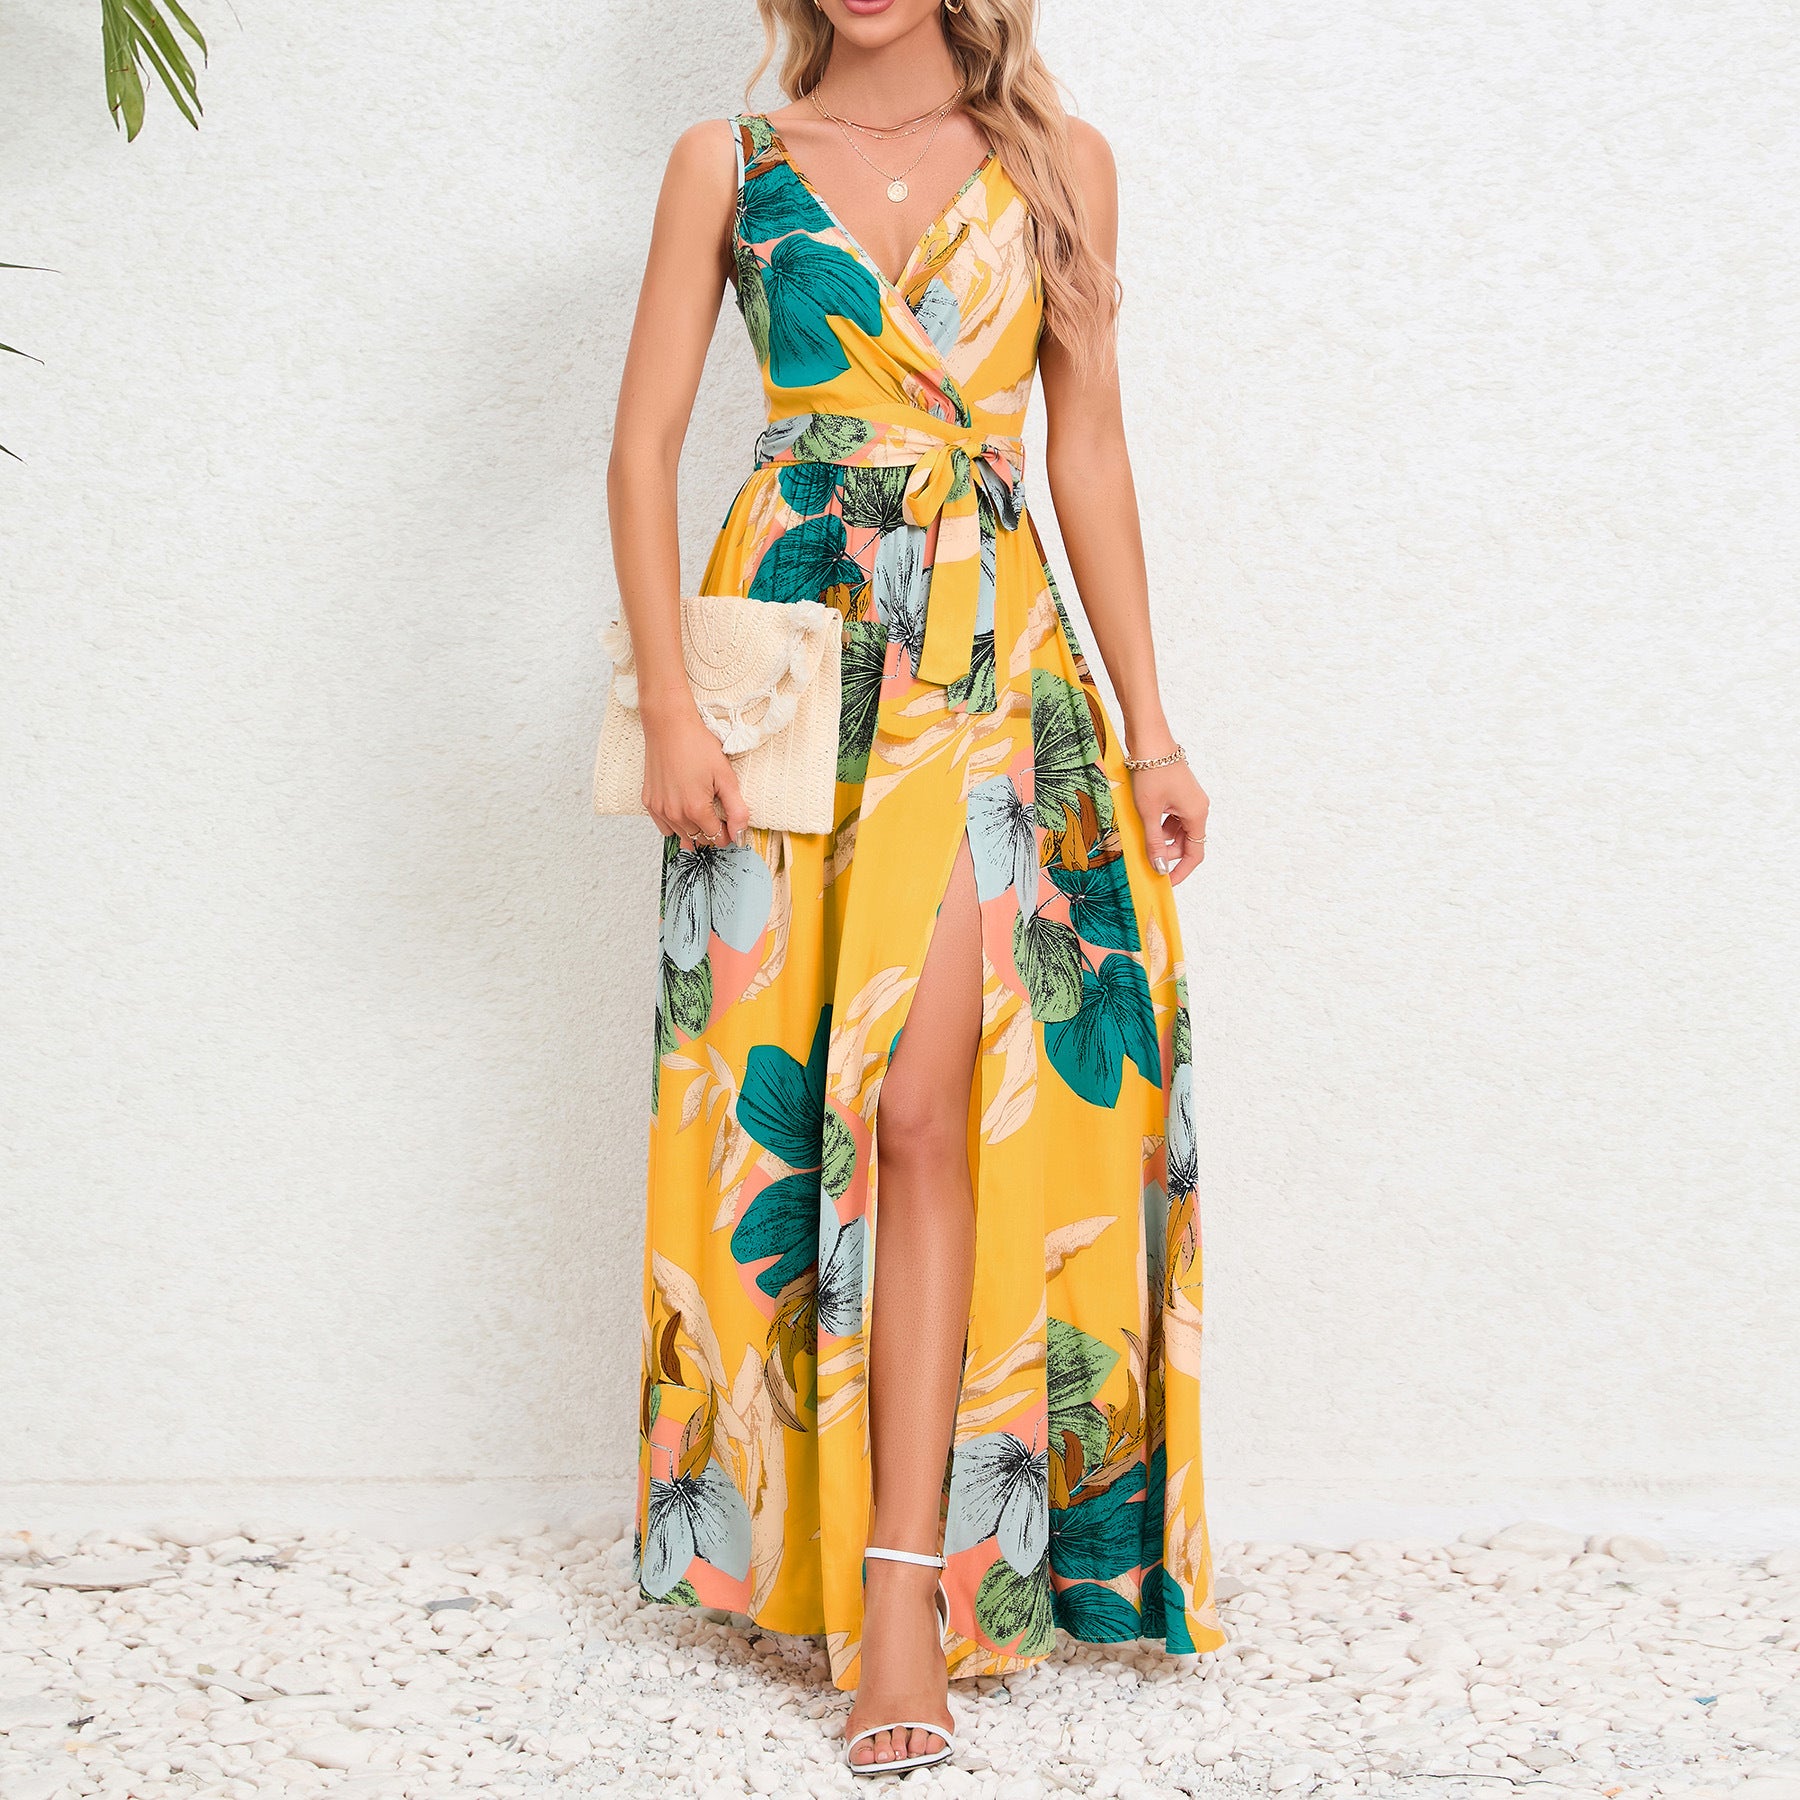 Floral Print V-neck Long Dress Summer Fashion with Waist Tie and Sleeveless Design